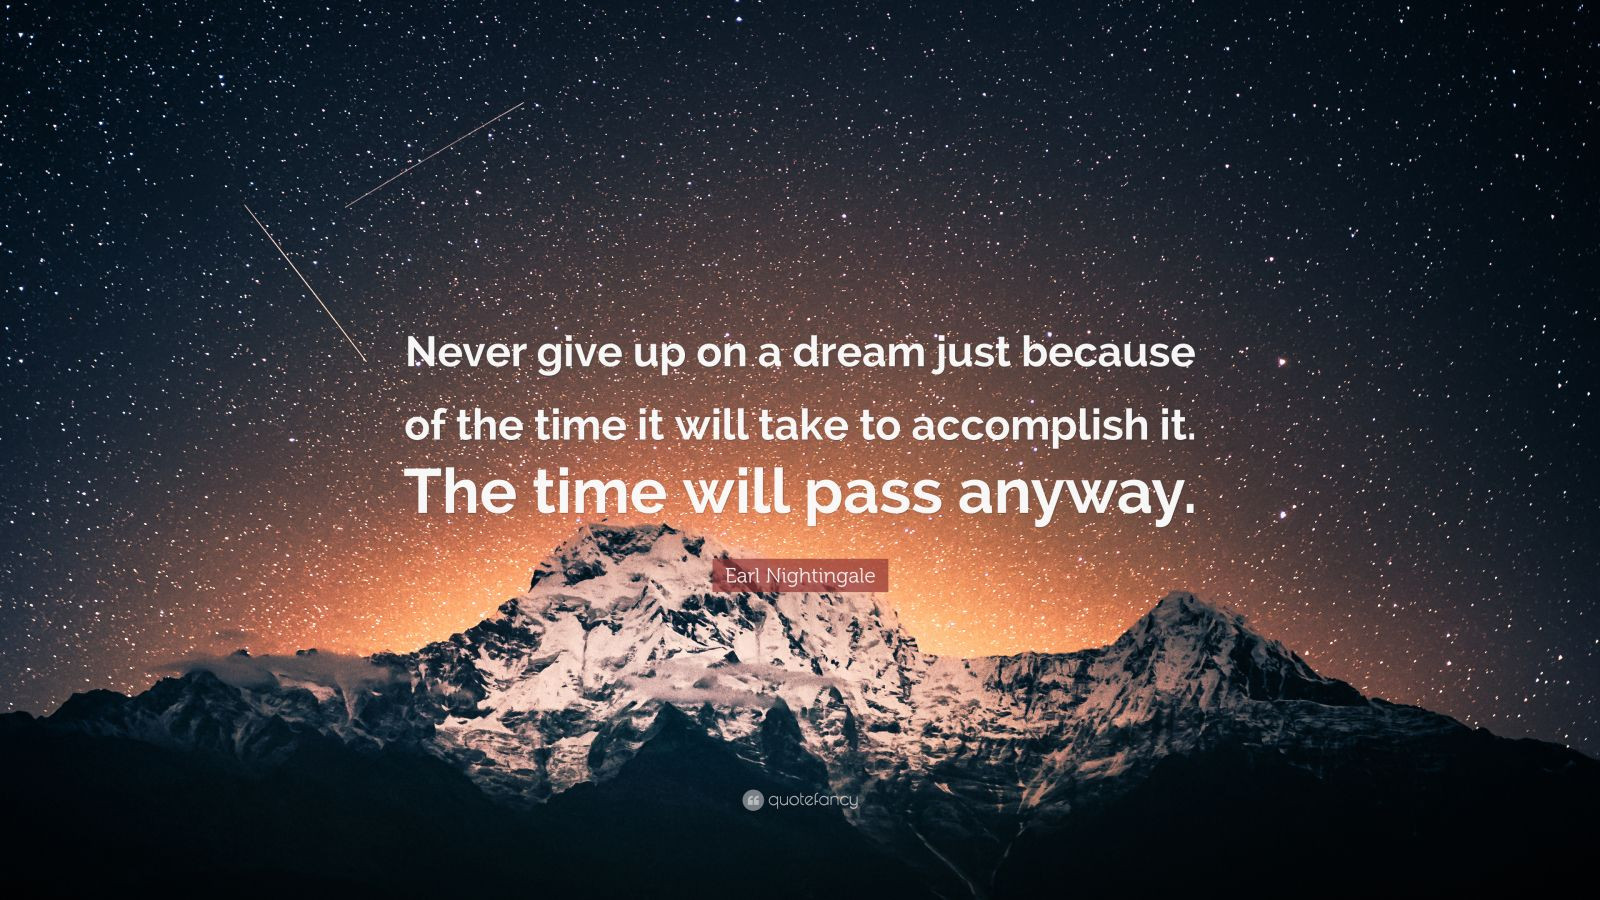 Motivational Quotes Background
 Inspirational Quotes 100 wallpapers Quotefancy